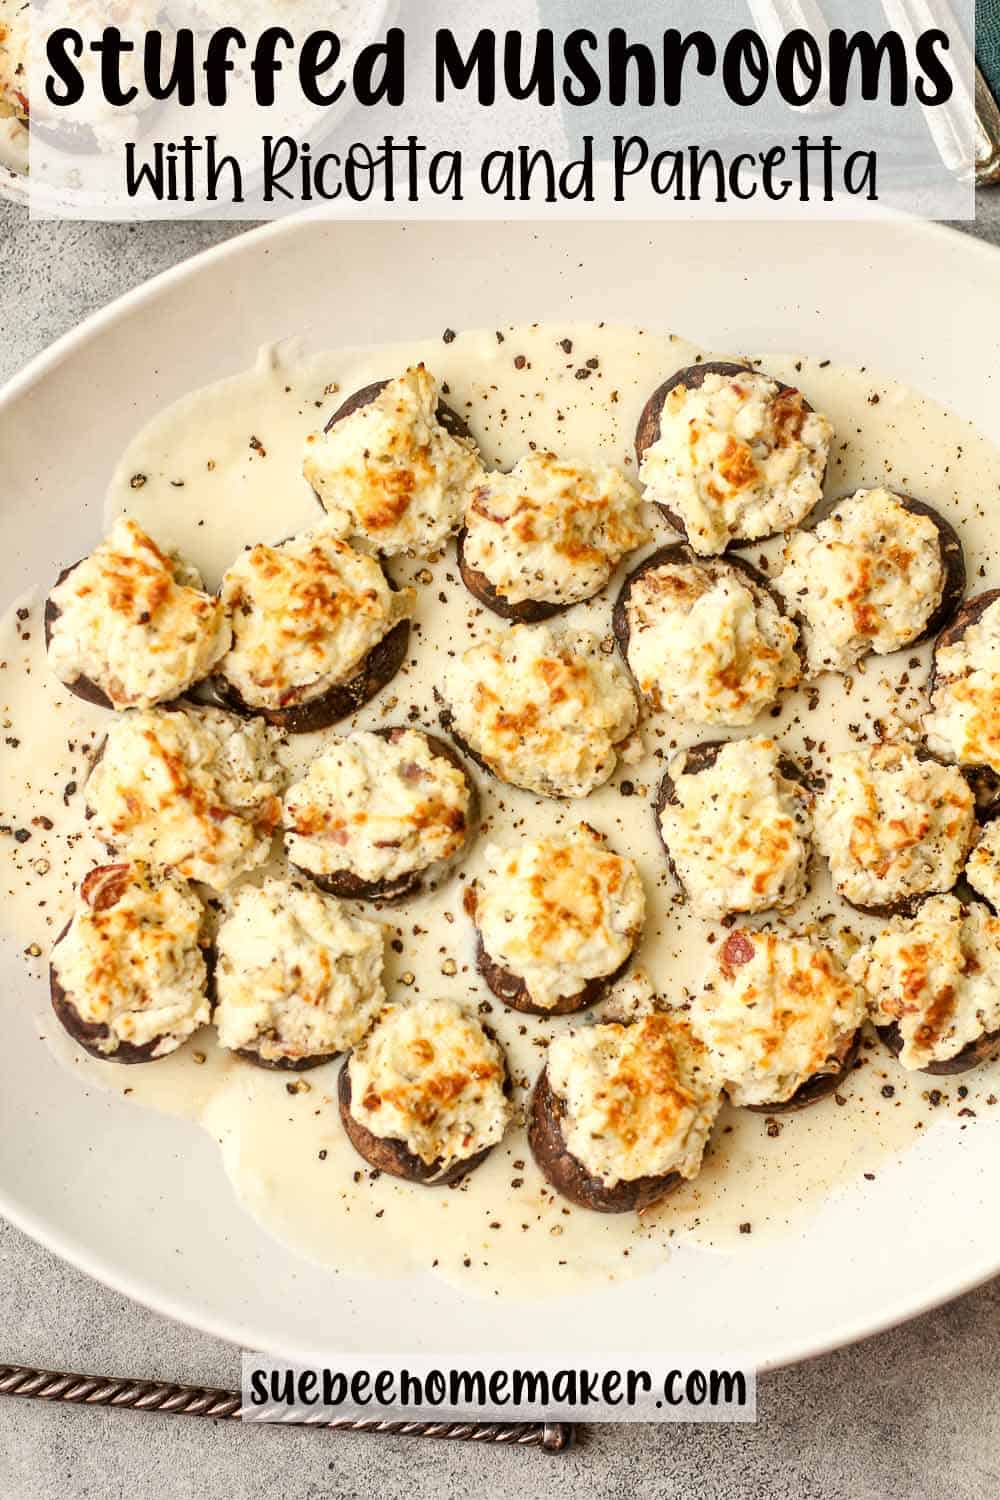 A serving dish of stuffed mushrooms with ricotta and pancetta.